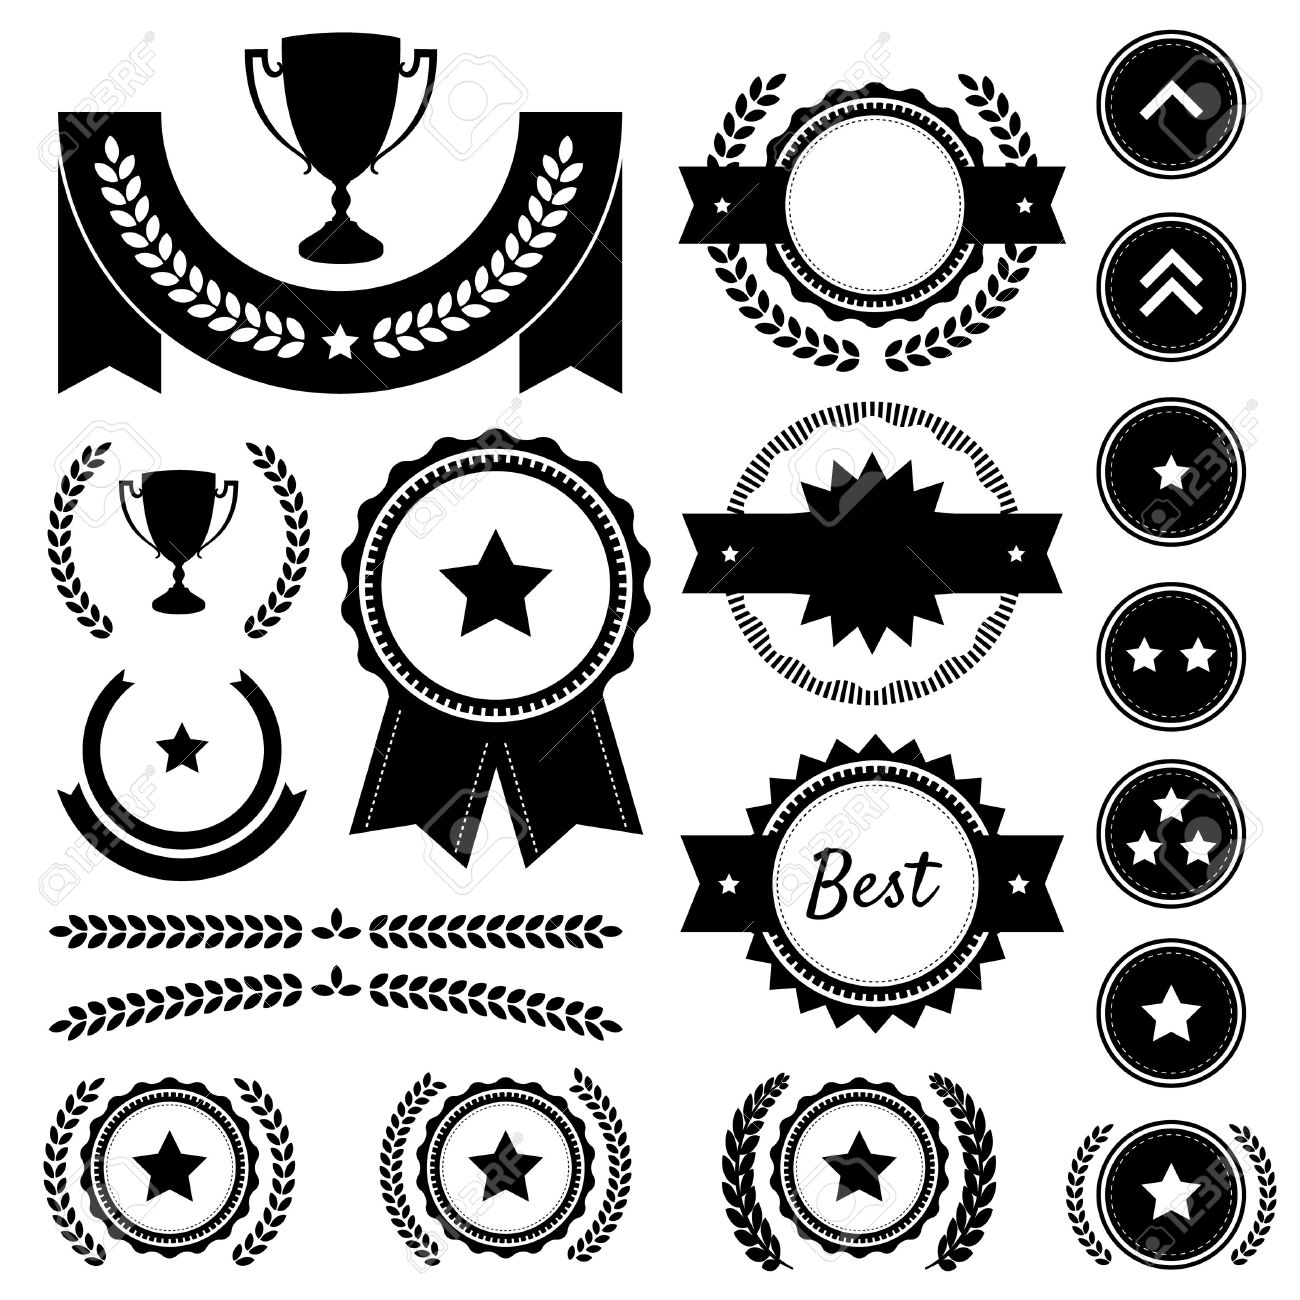 Set Of Achievement Award Silhouettes Includes Various Badges.